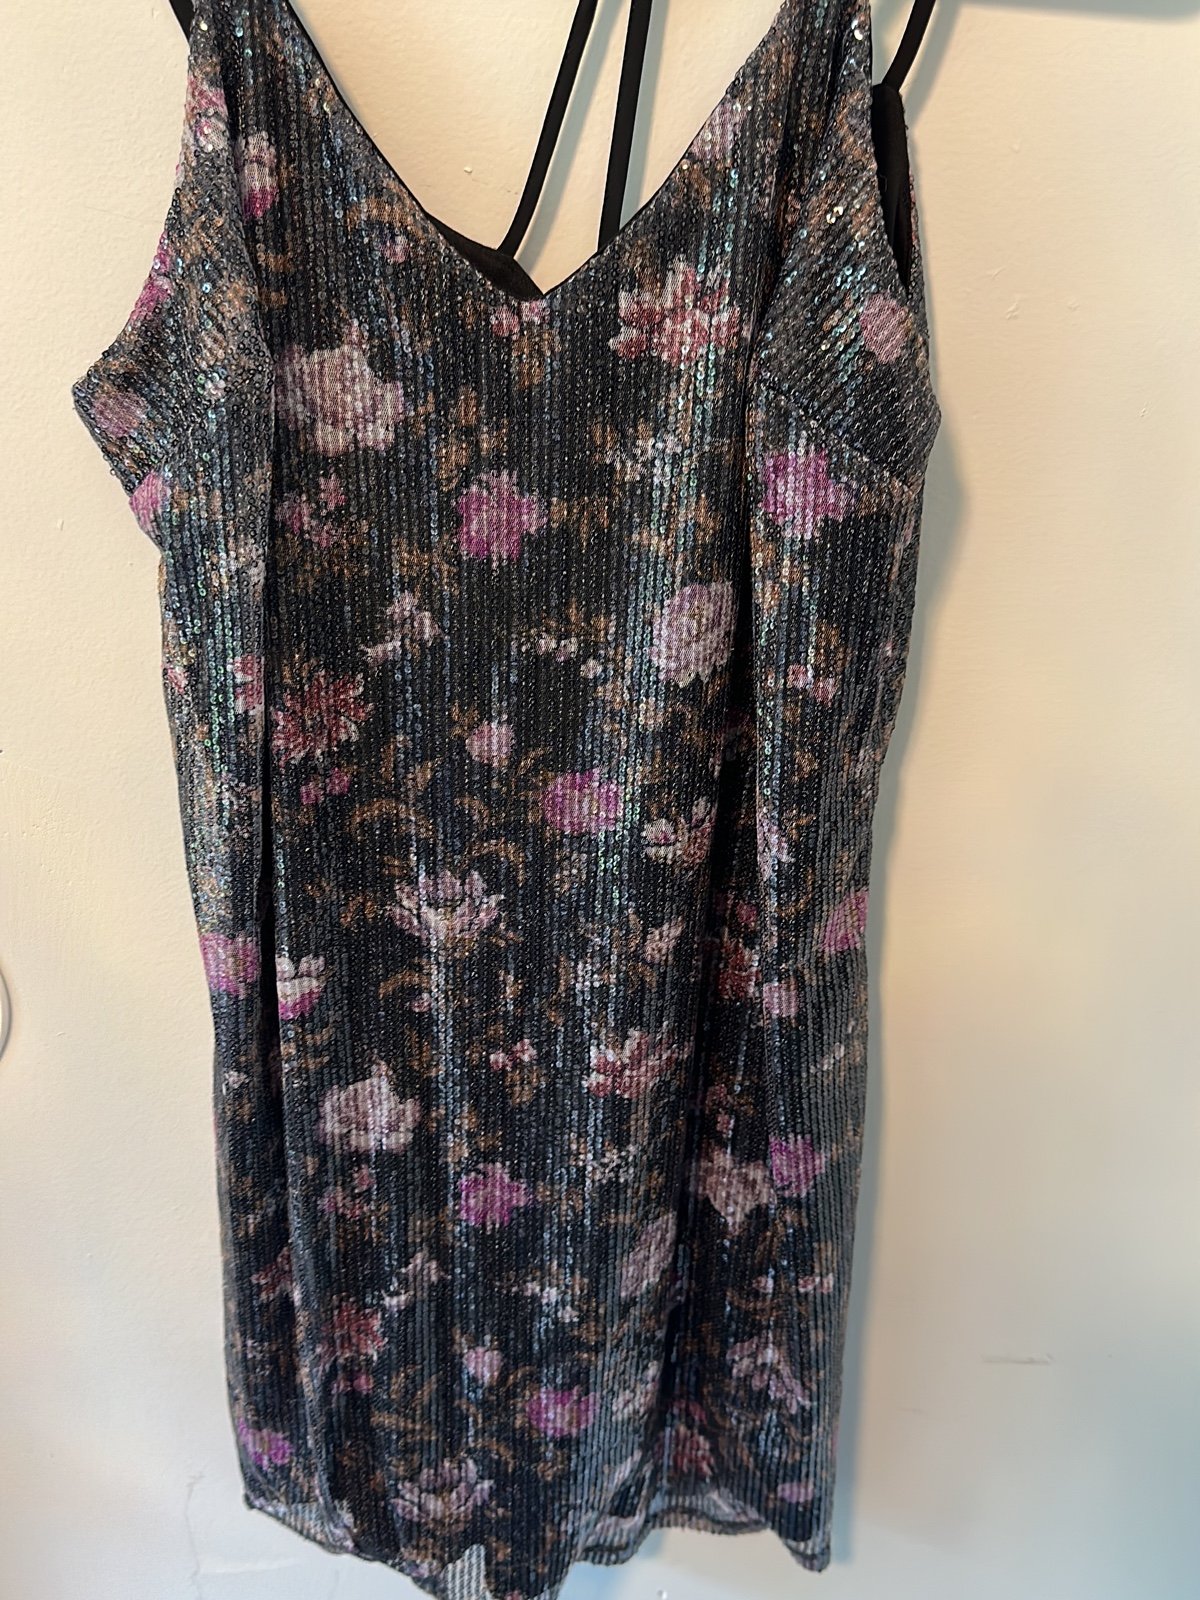 Exclusive 90s Floral strappy sequined black cocktail slip dress pCdatW9nd hot sale